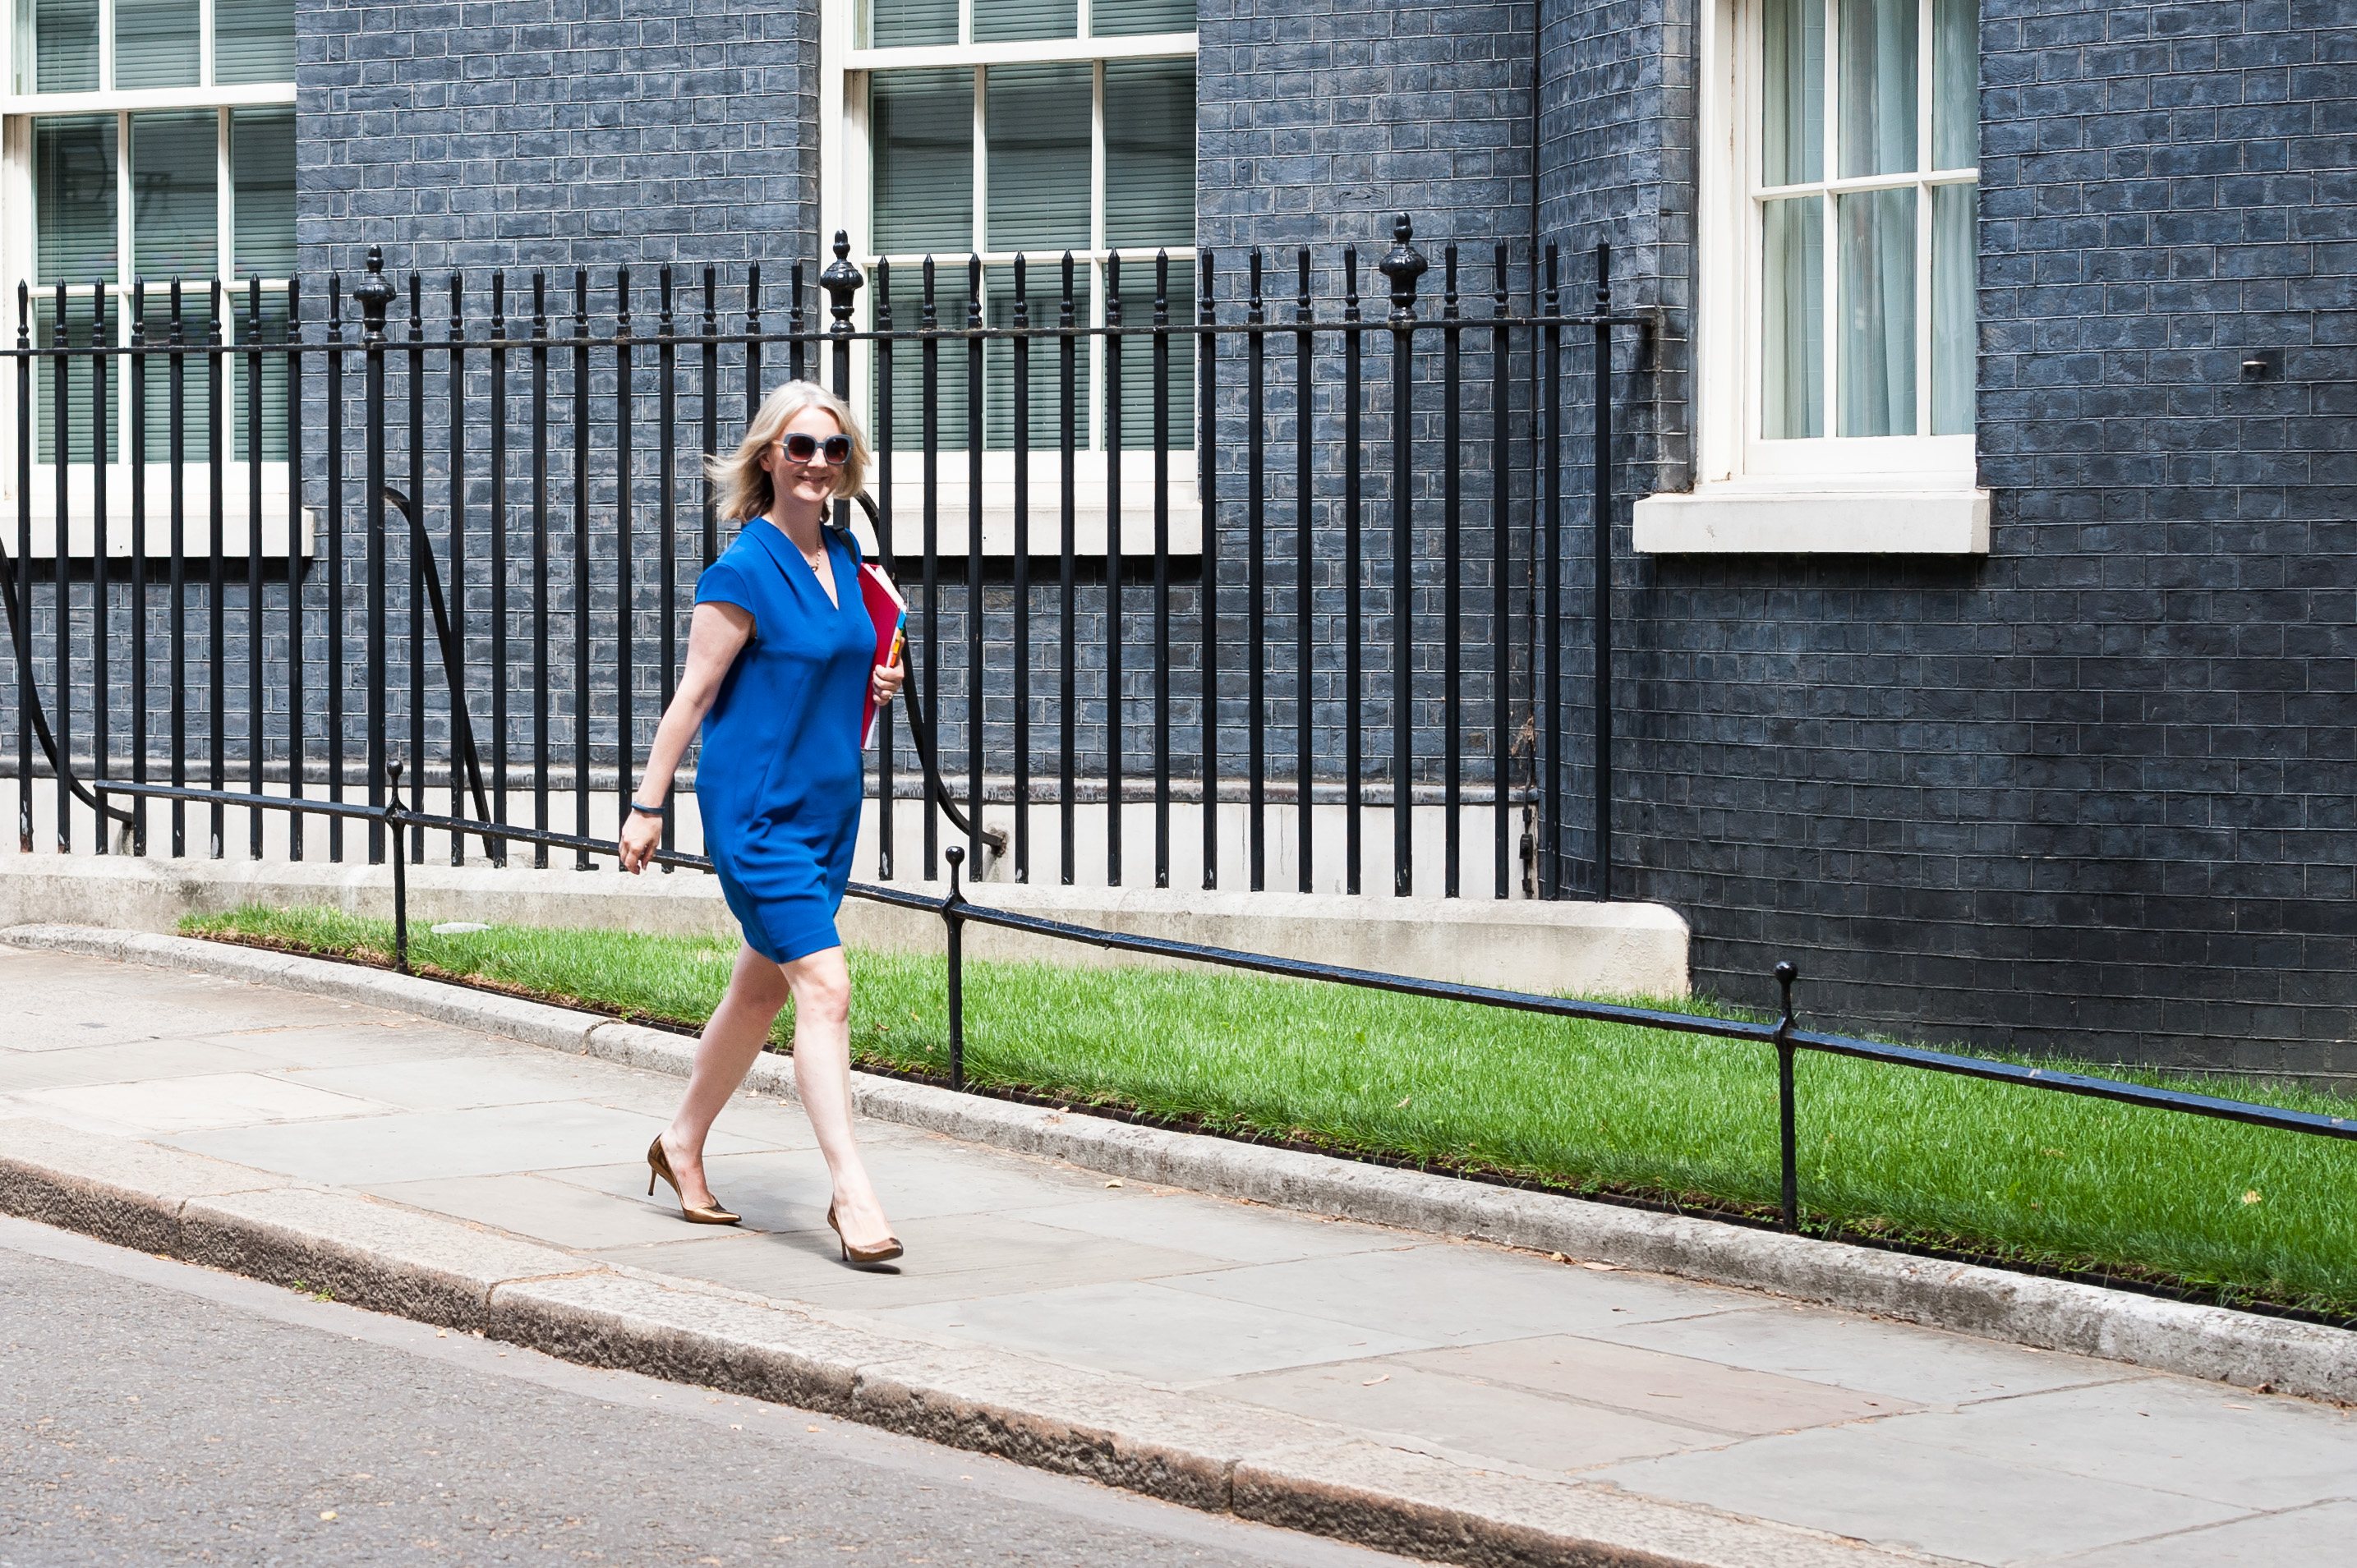 Cabinet Meeting At 10 Downing Street In London